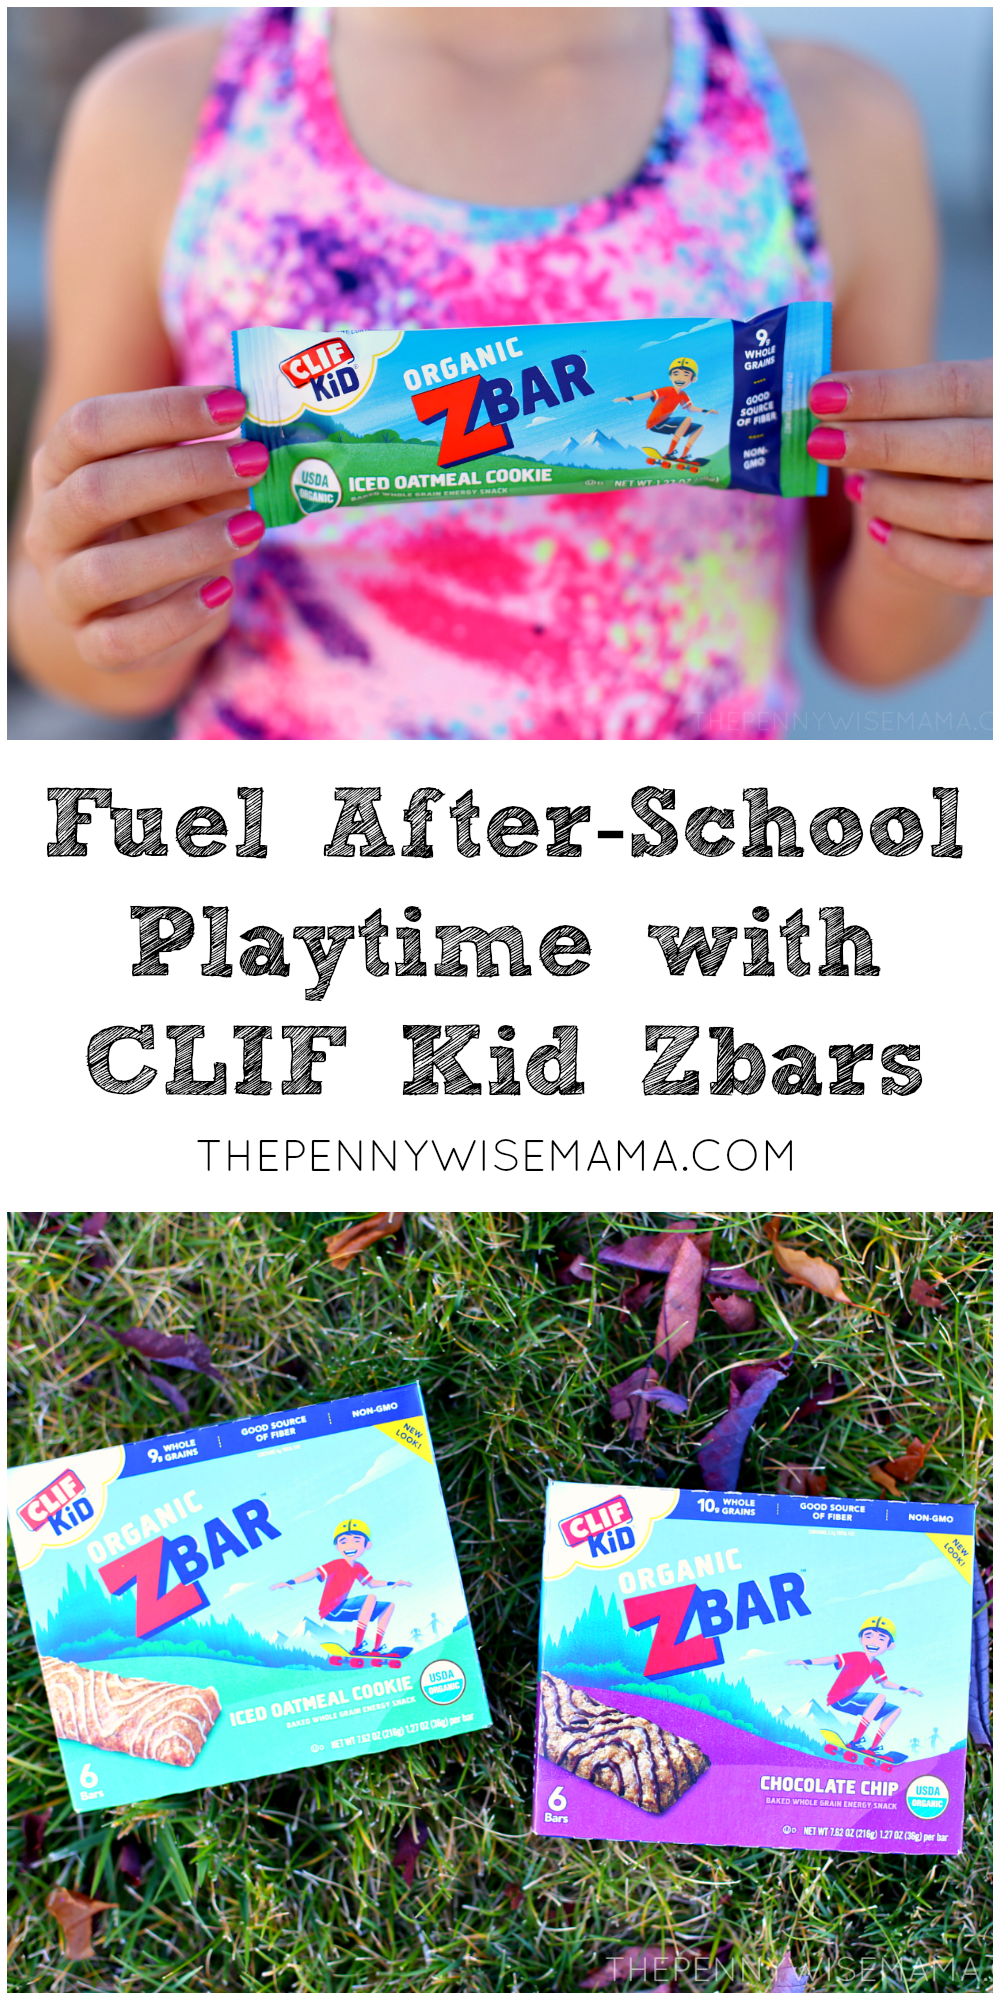 Fuel After-School Playtime with CLIF Kid